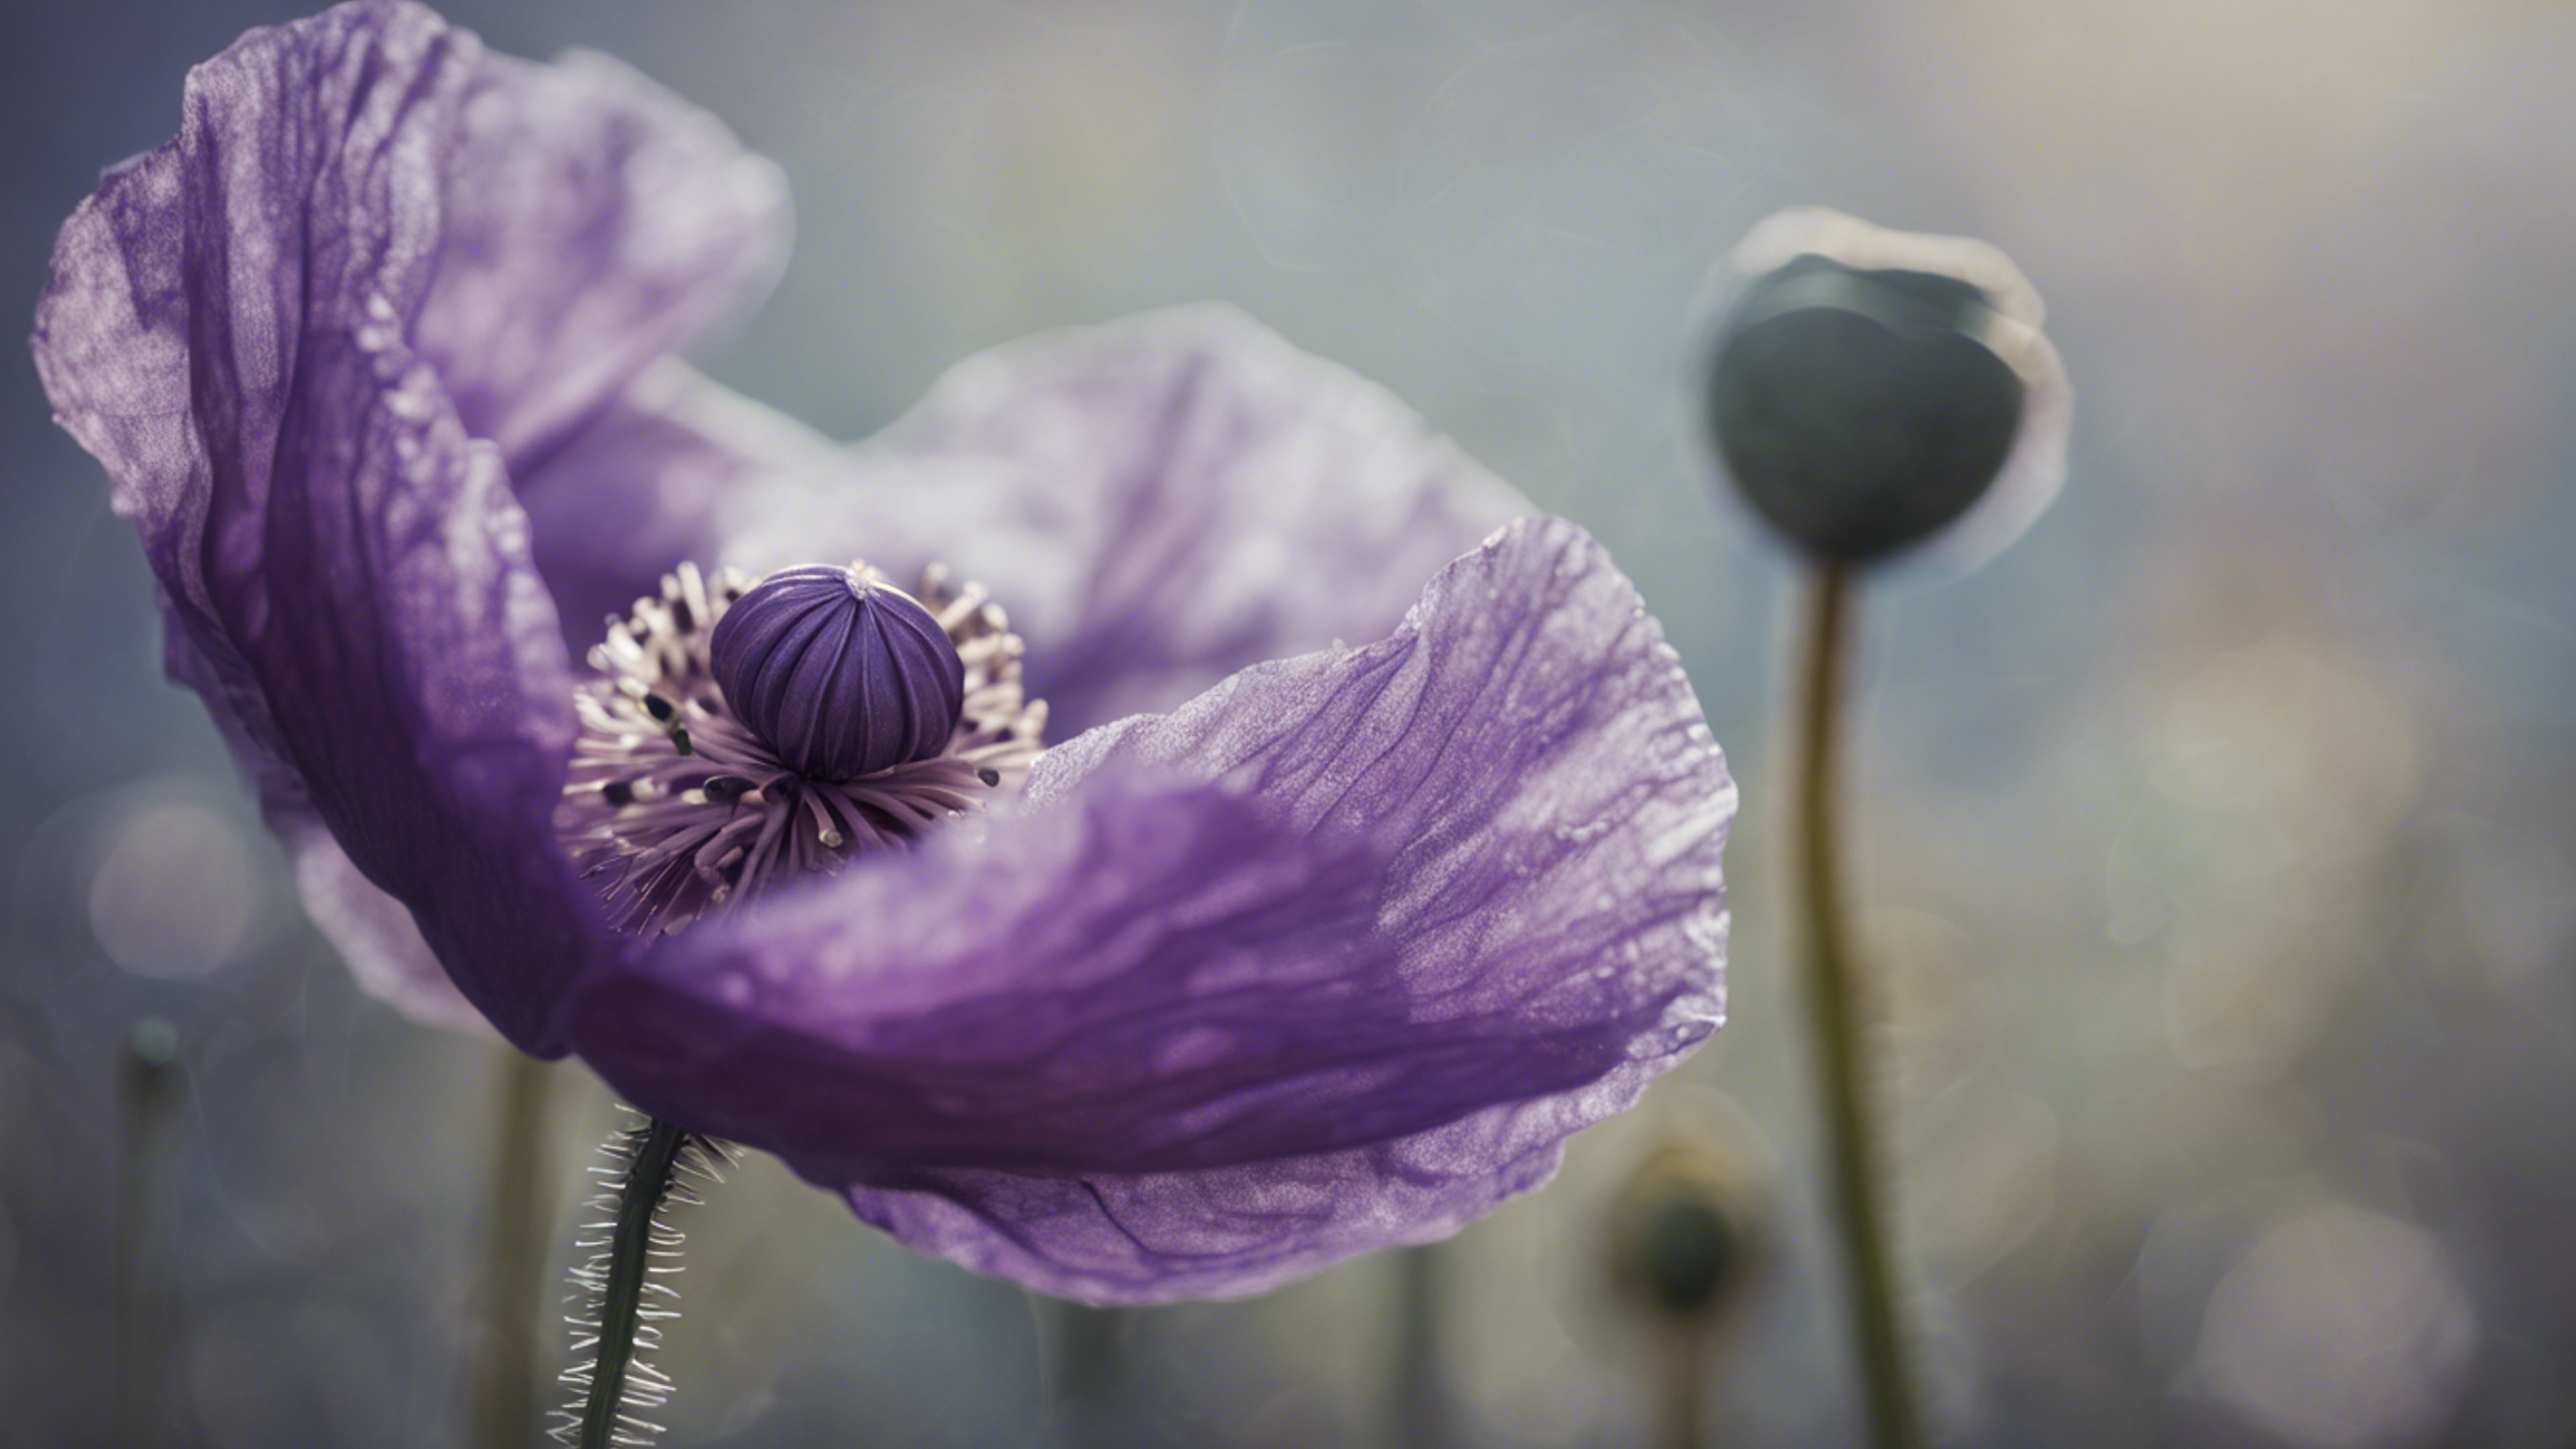 A close-up of a purple poppy with intricate details on a textured canvas. ورق الجدران[f5d07fa5408f4773ae7b]